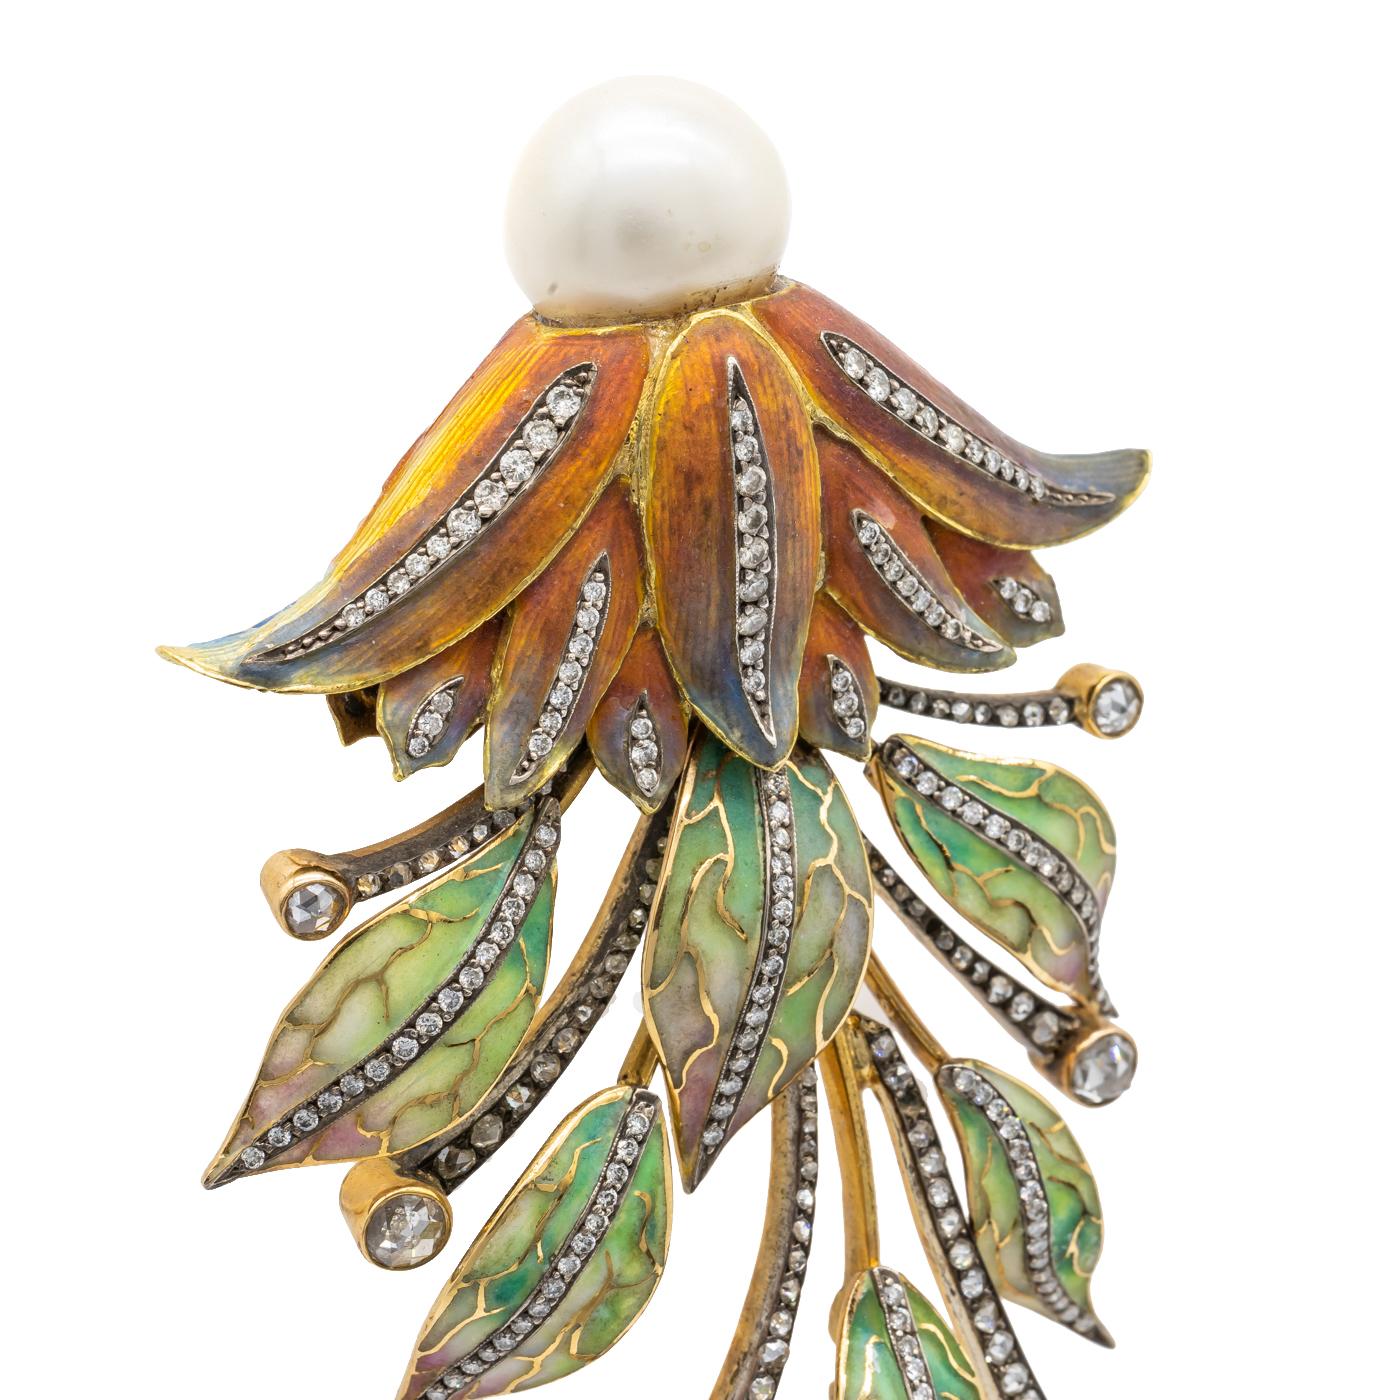 A Moira design articulated flower brooch, set with a pearl bud at the top measuring an estimated 13mm, with turned back orange plique a jour enamel petals with diamond detail, and green enamel and diamond leaves, with rubover set rose cut diamonds